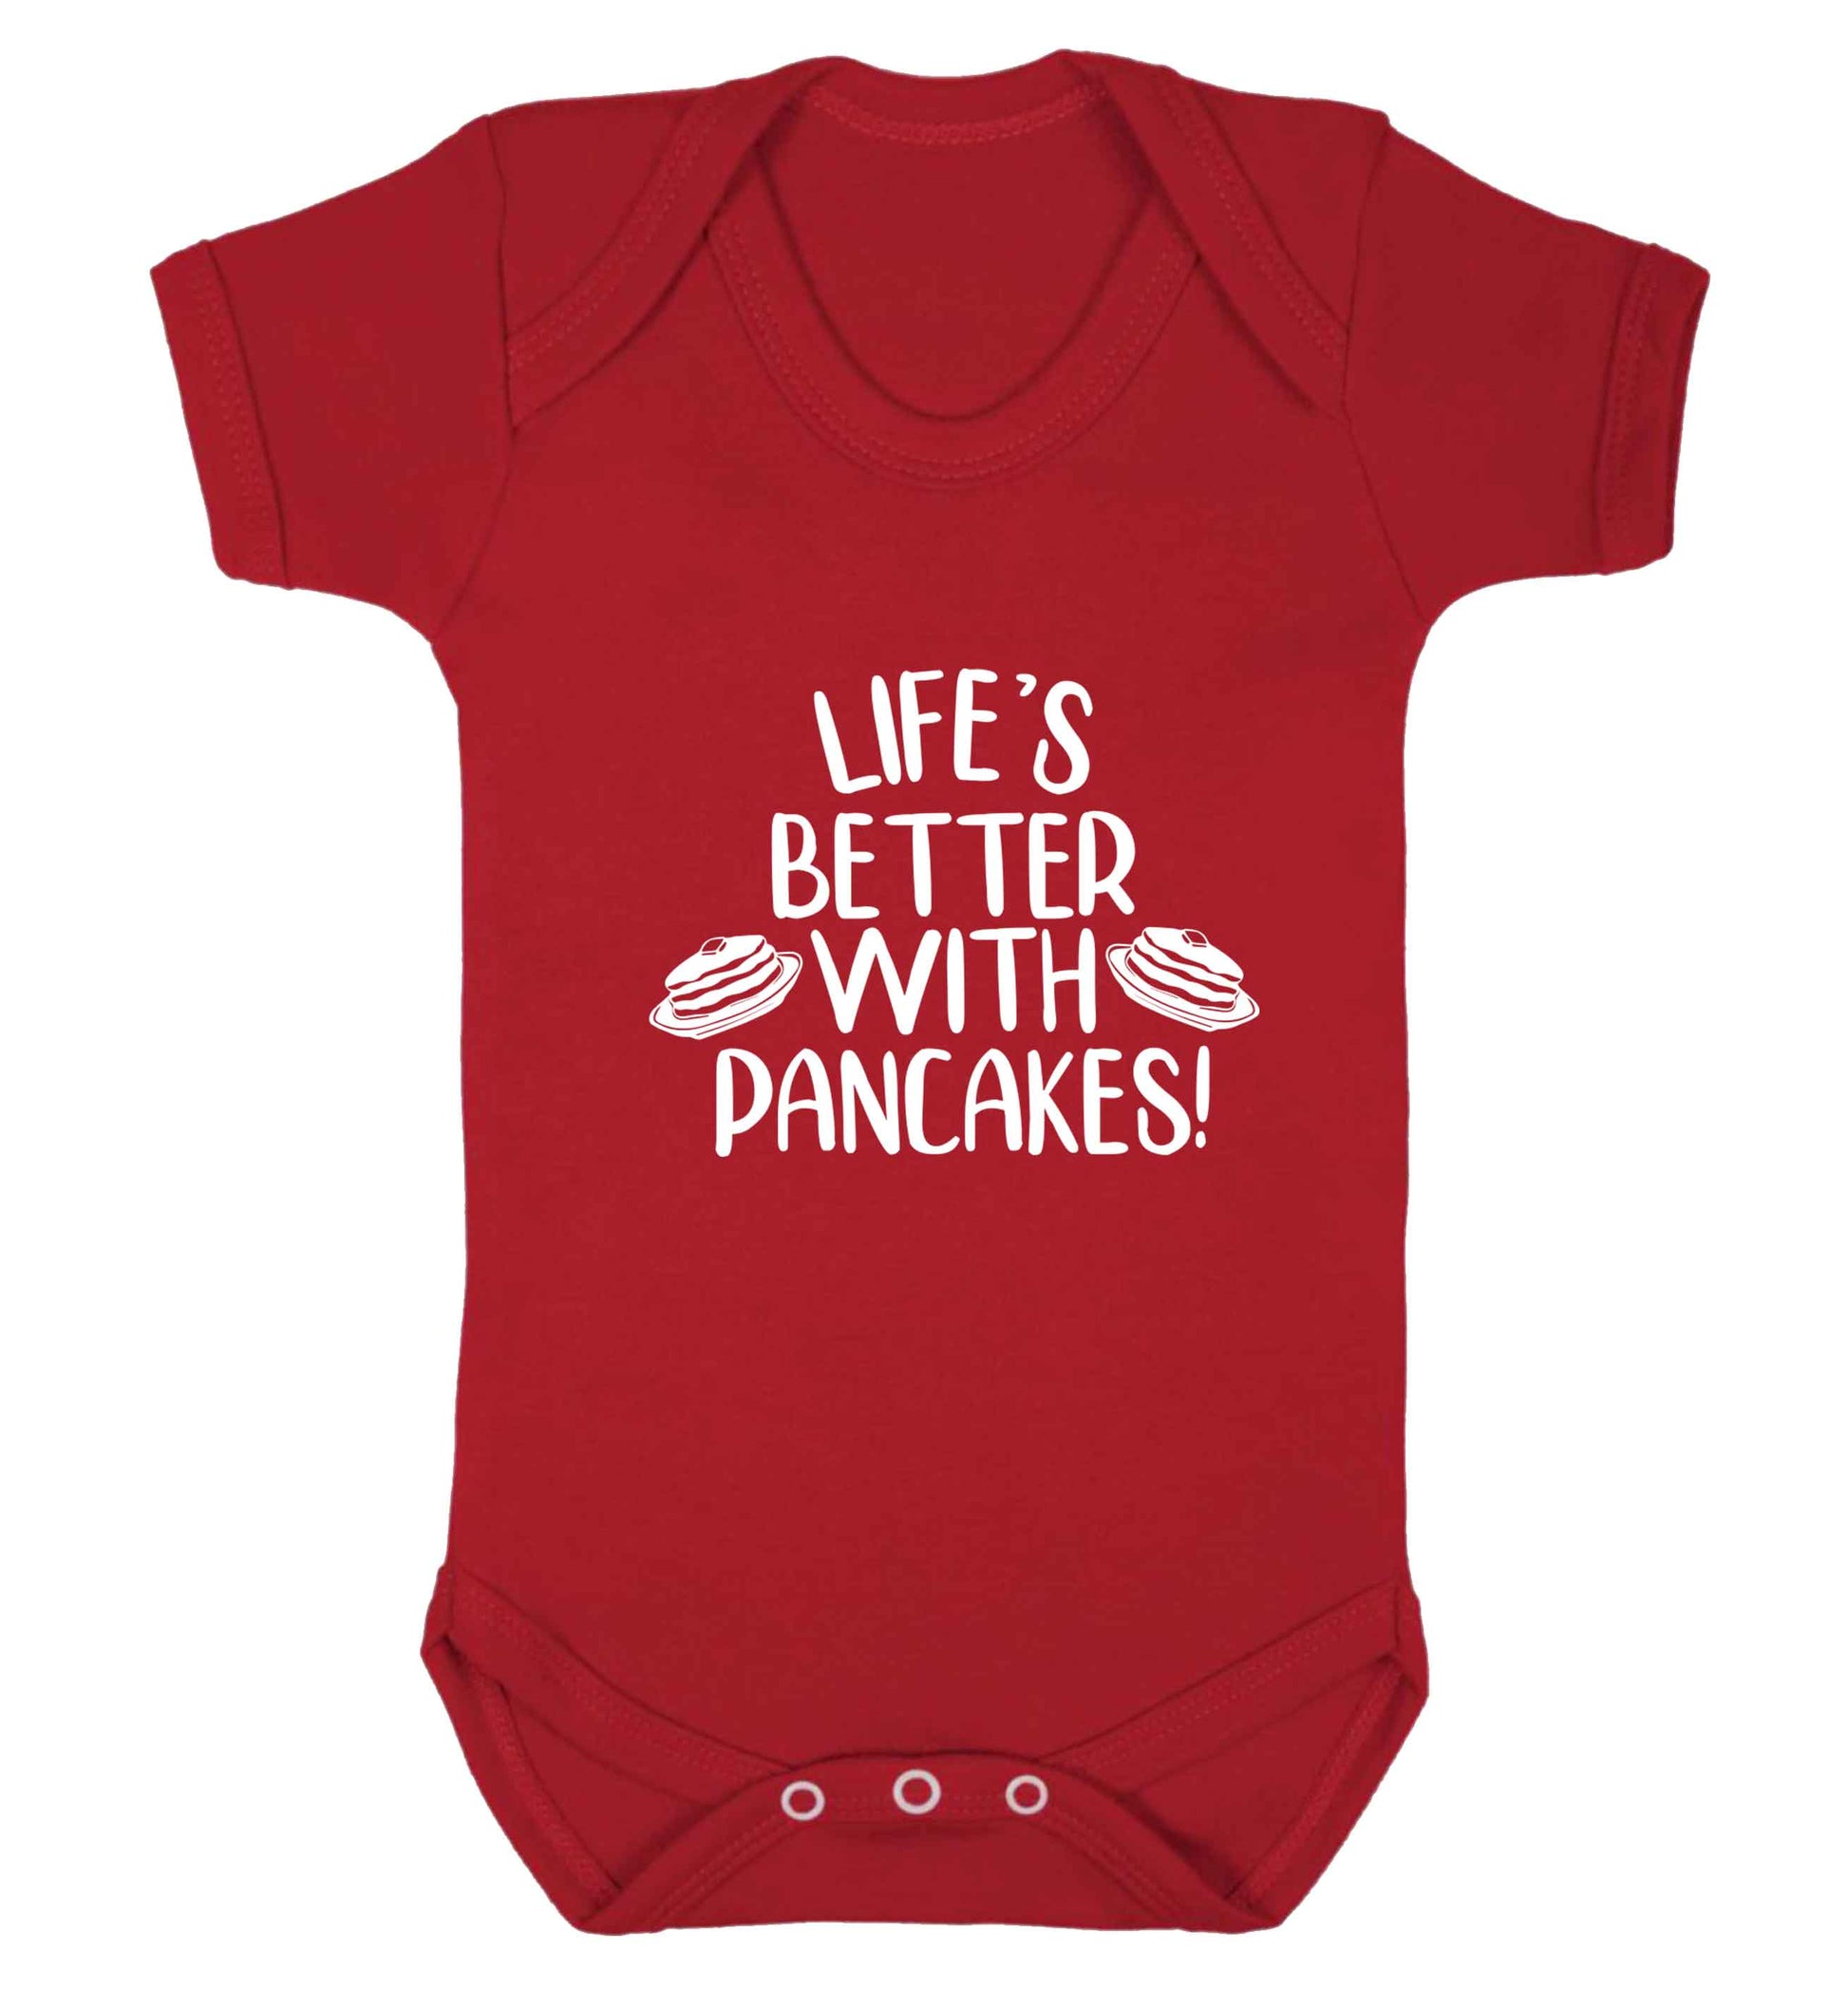 Life's better with pancakes baby vest red 18-24 months